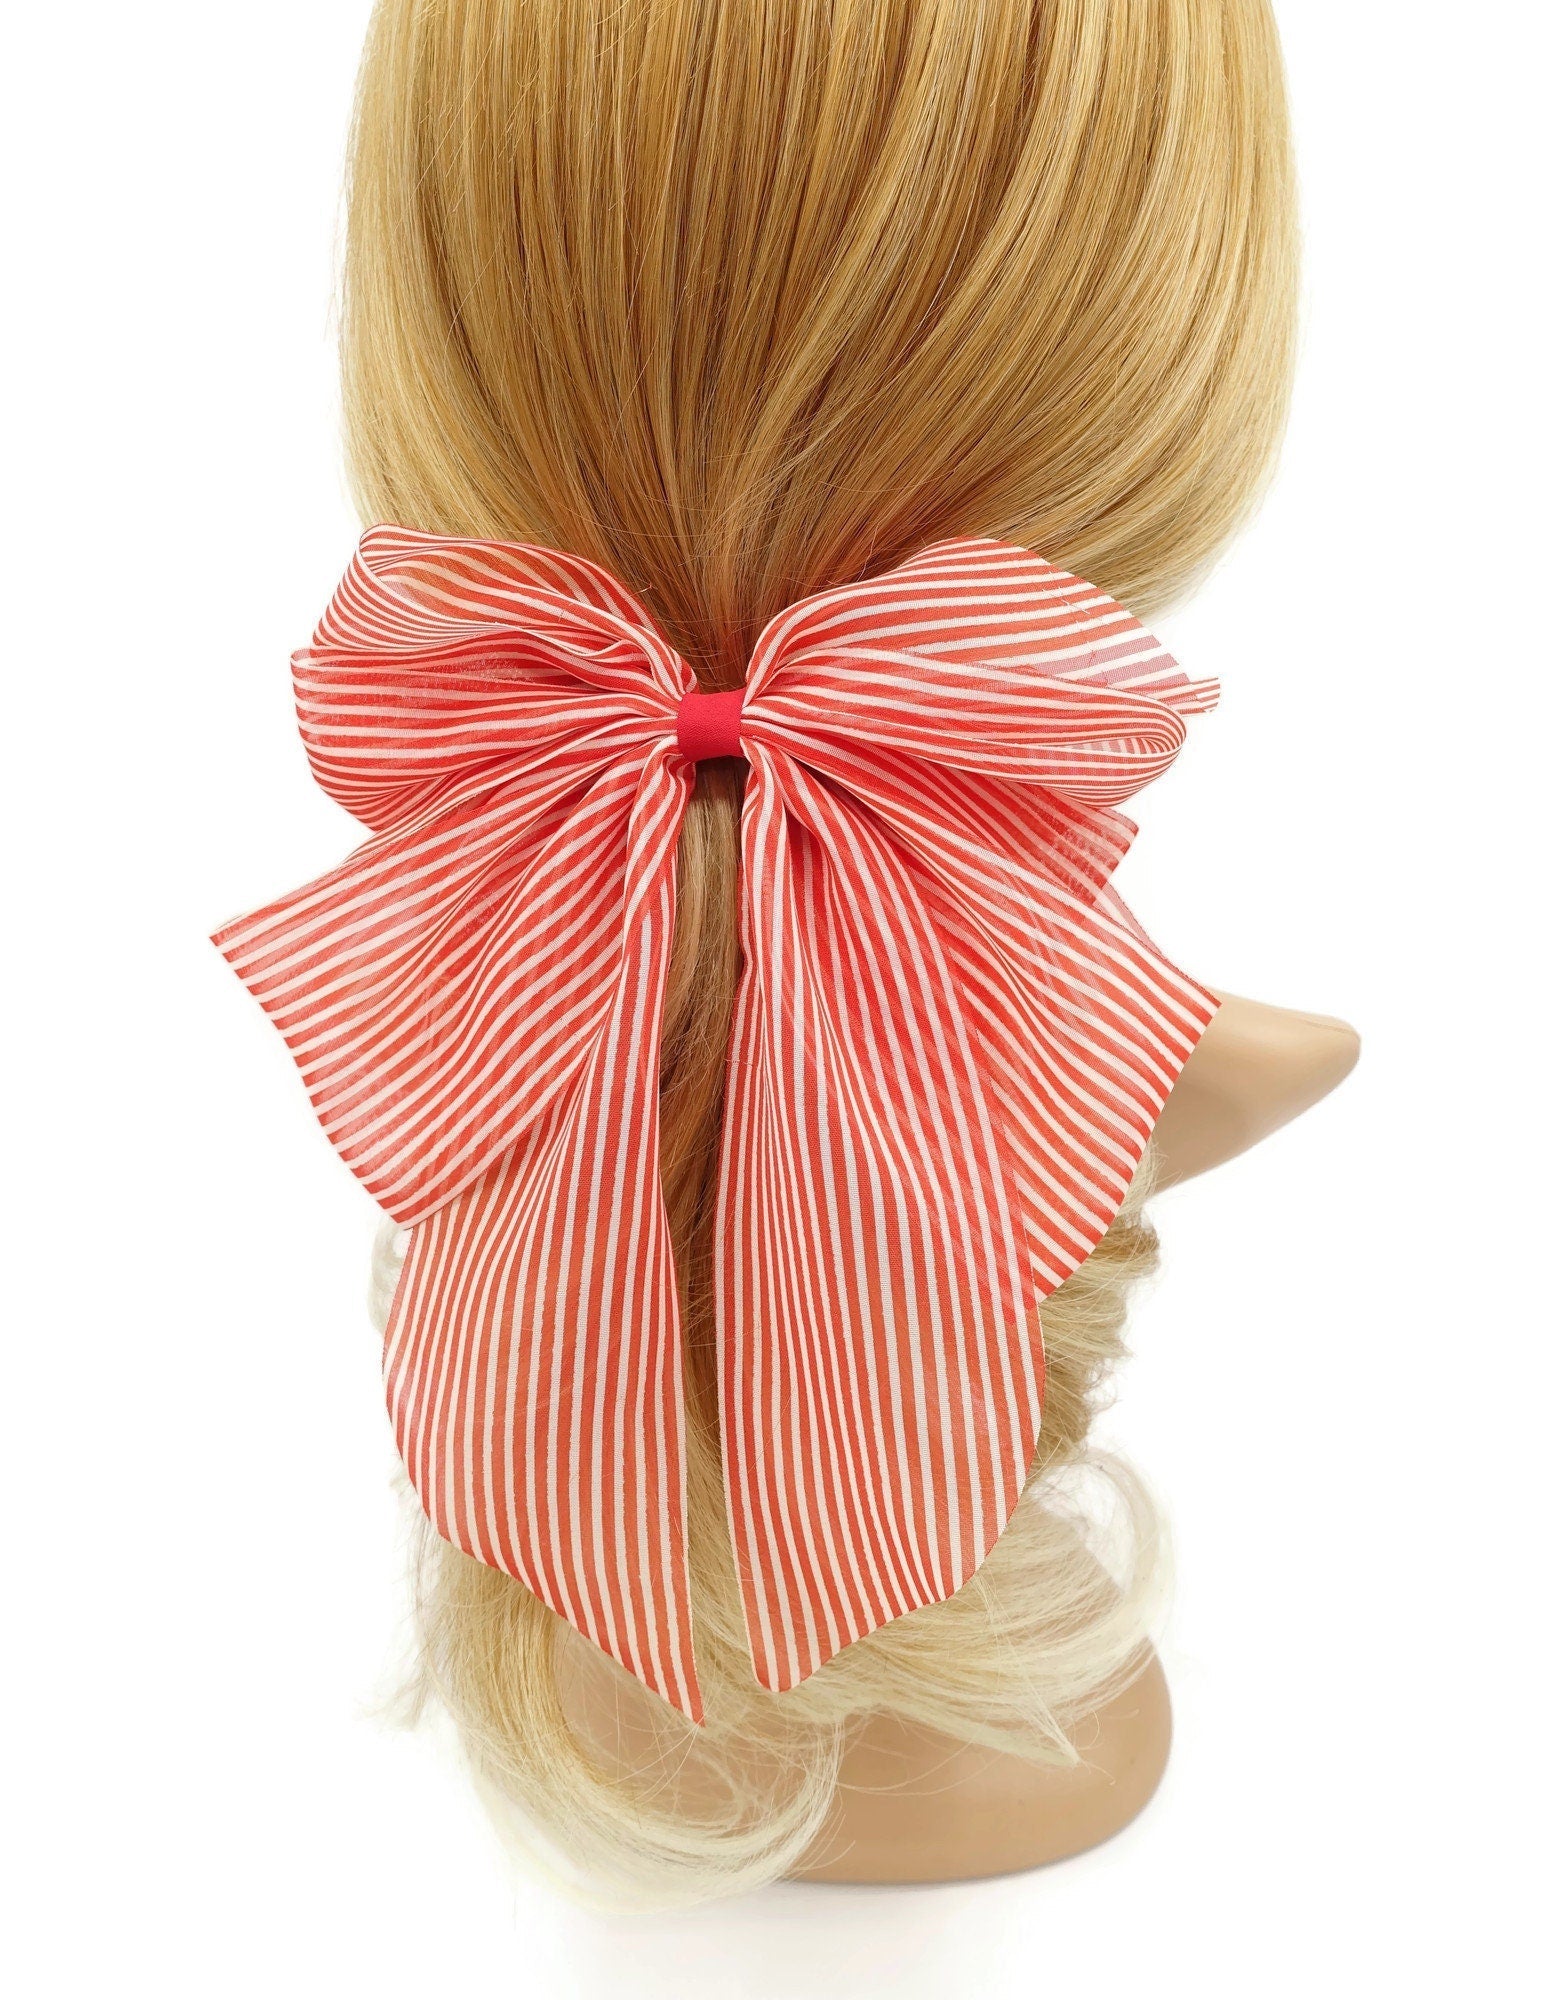 VeryShine Barrette (Bow) narrow stripe hair bow layered style tail hair accessory for women